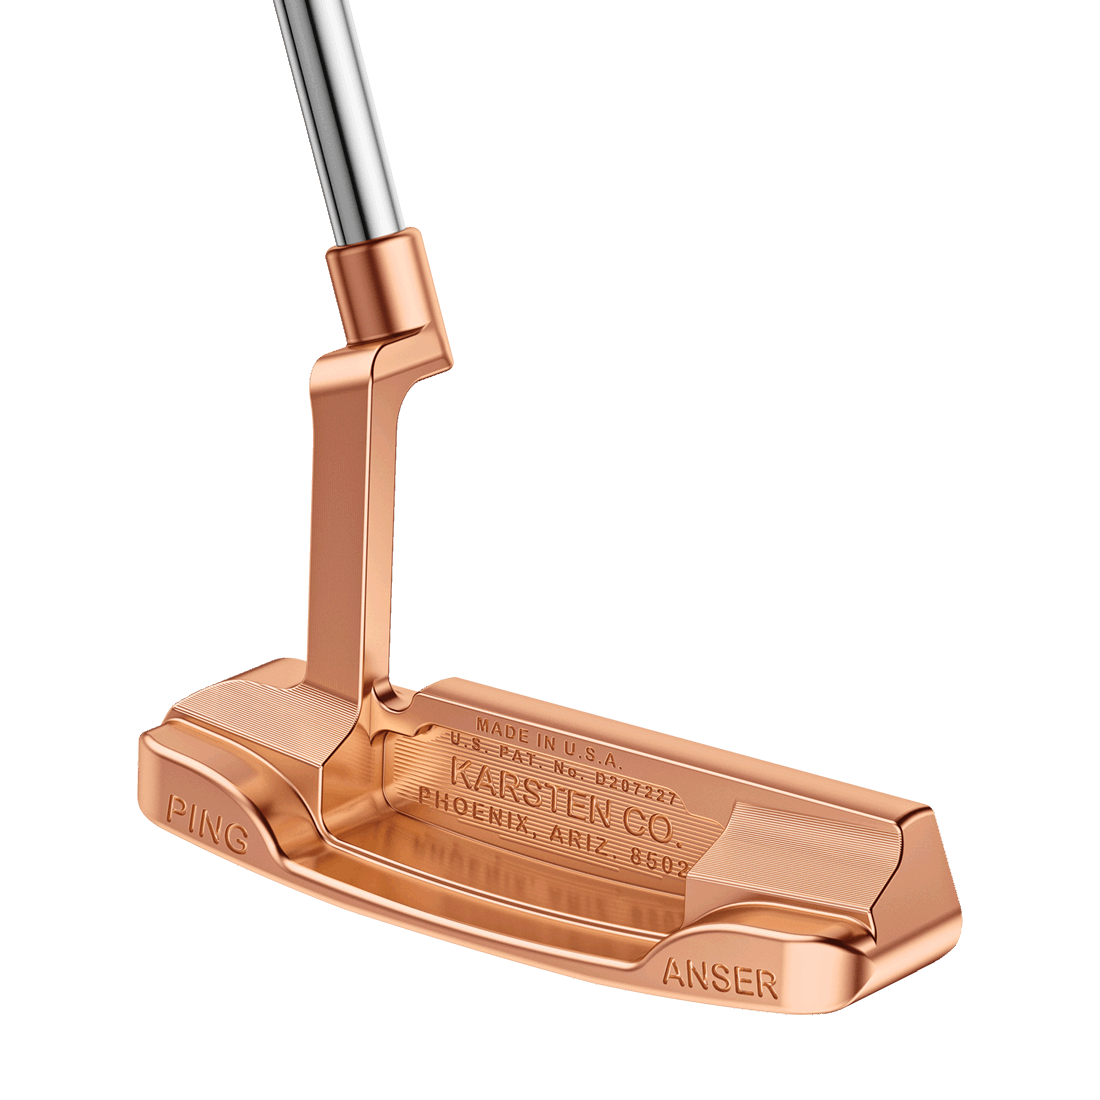 cavity view of PLD Limited Anser Patent 55 putter in copper with natural finish